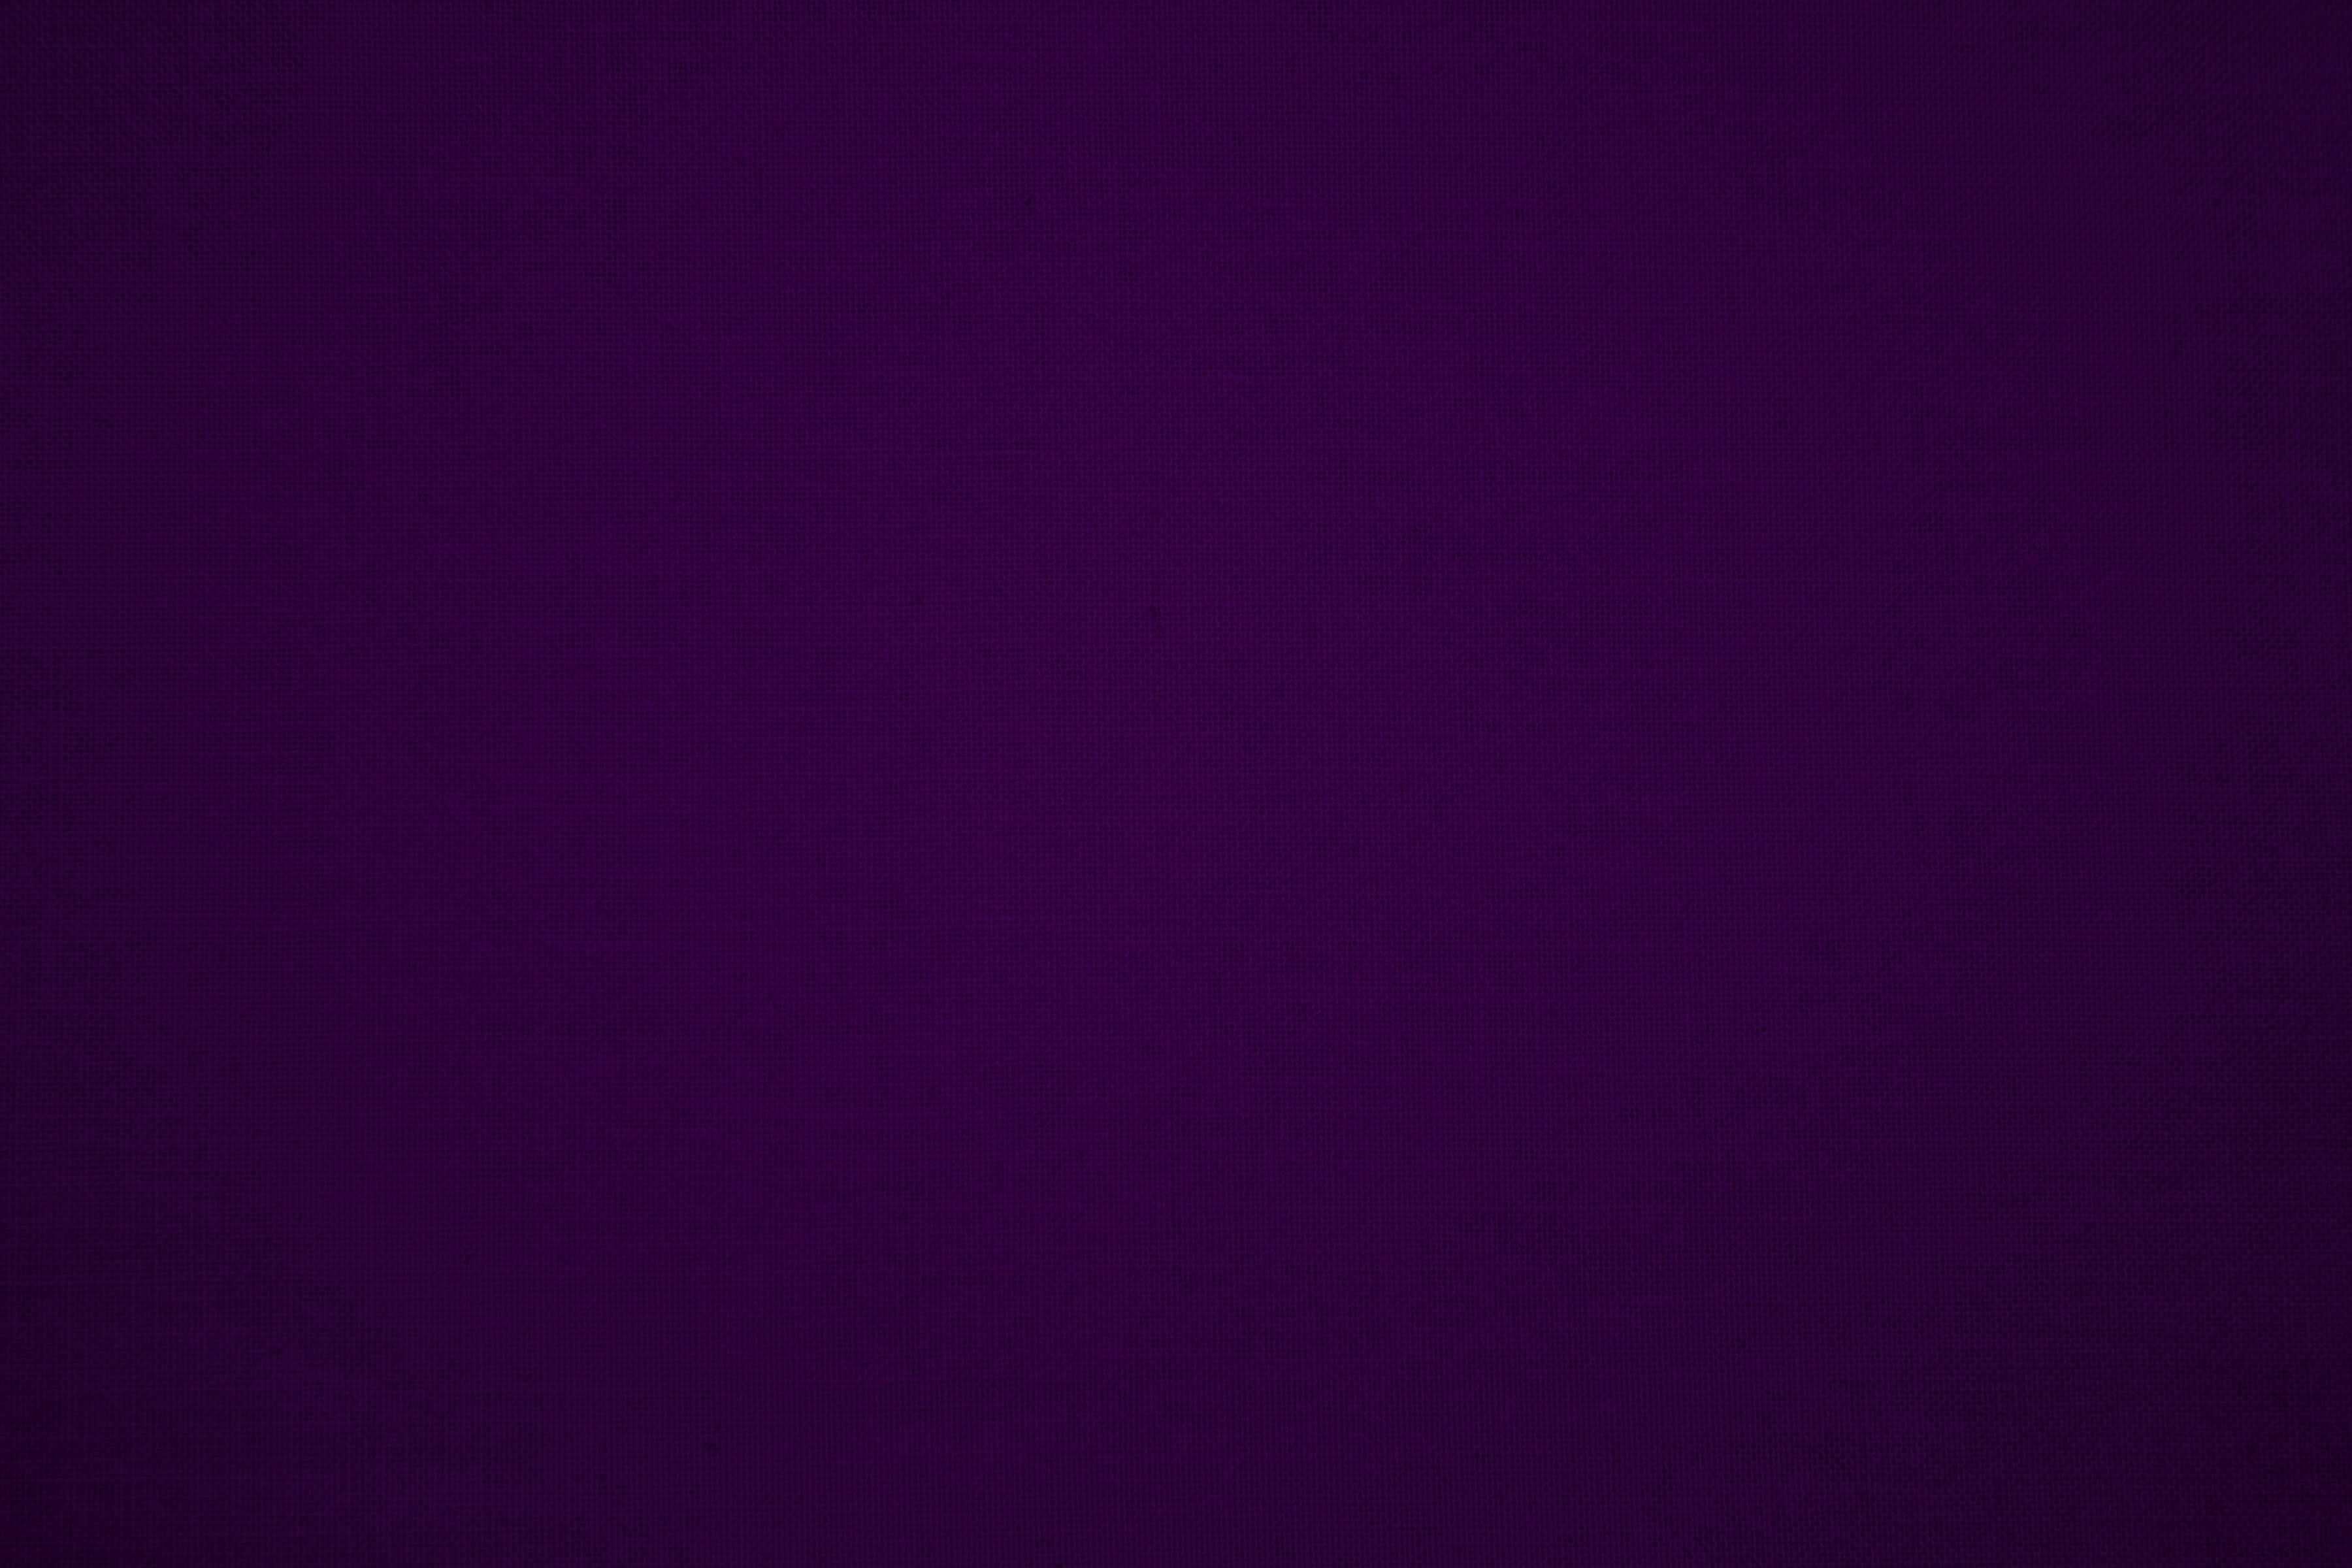 Page 6 - Free and customizable dark purple wallpaper templates